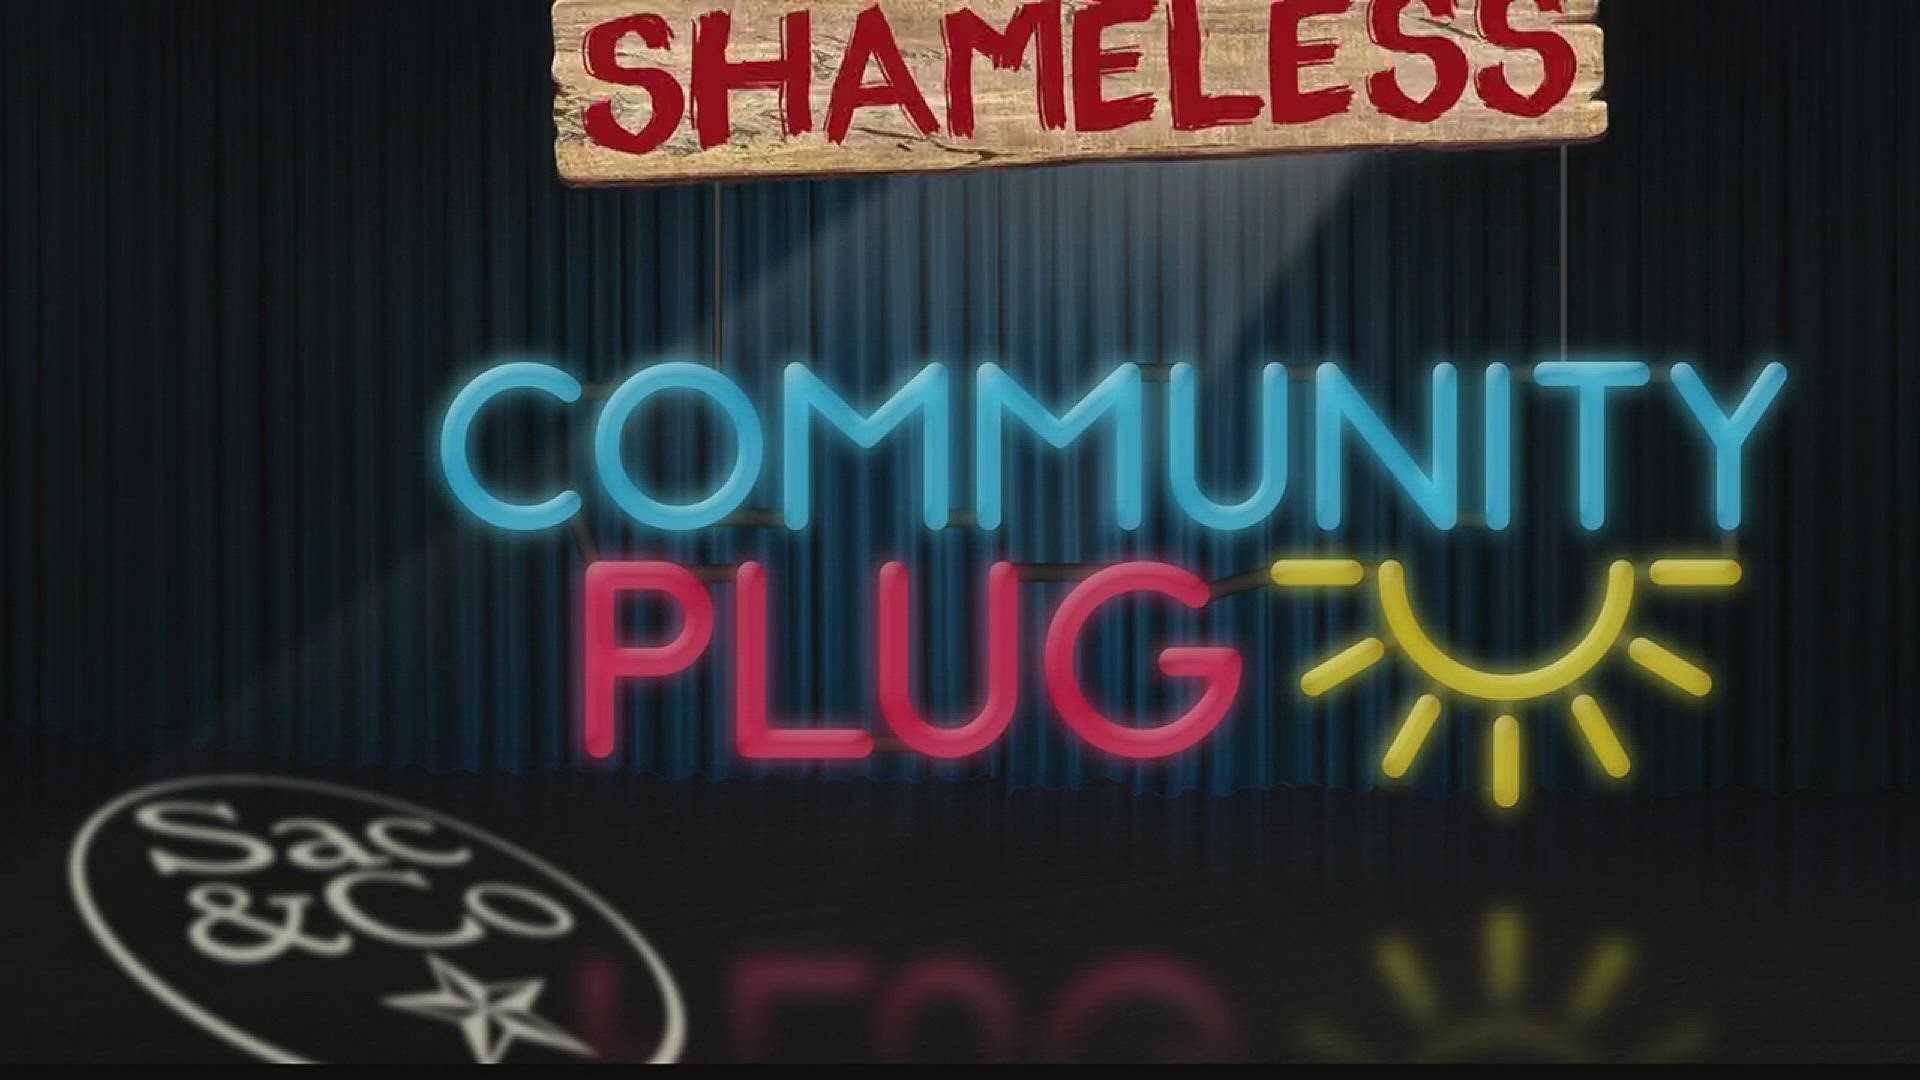 We're highlighting your events with your videos. See who was selected for this weeks"Shameless Community Plug".